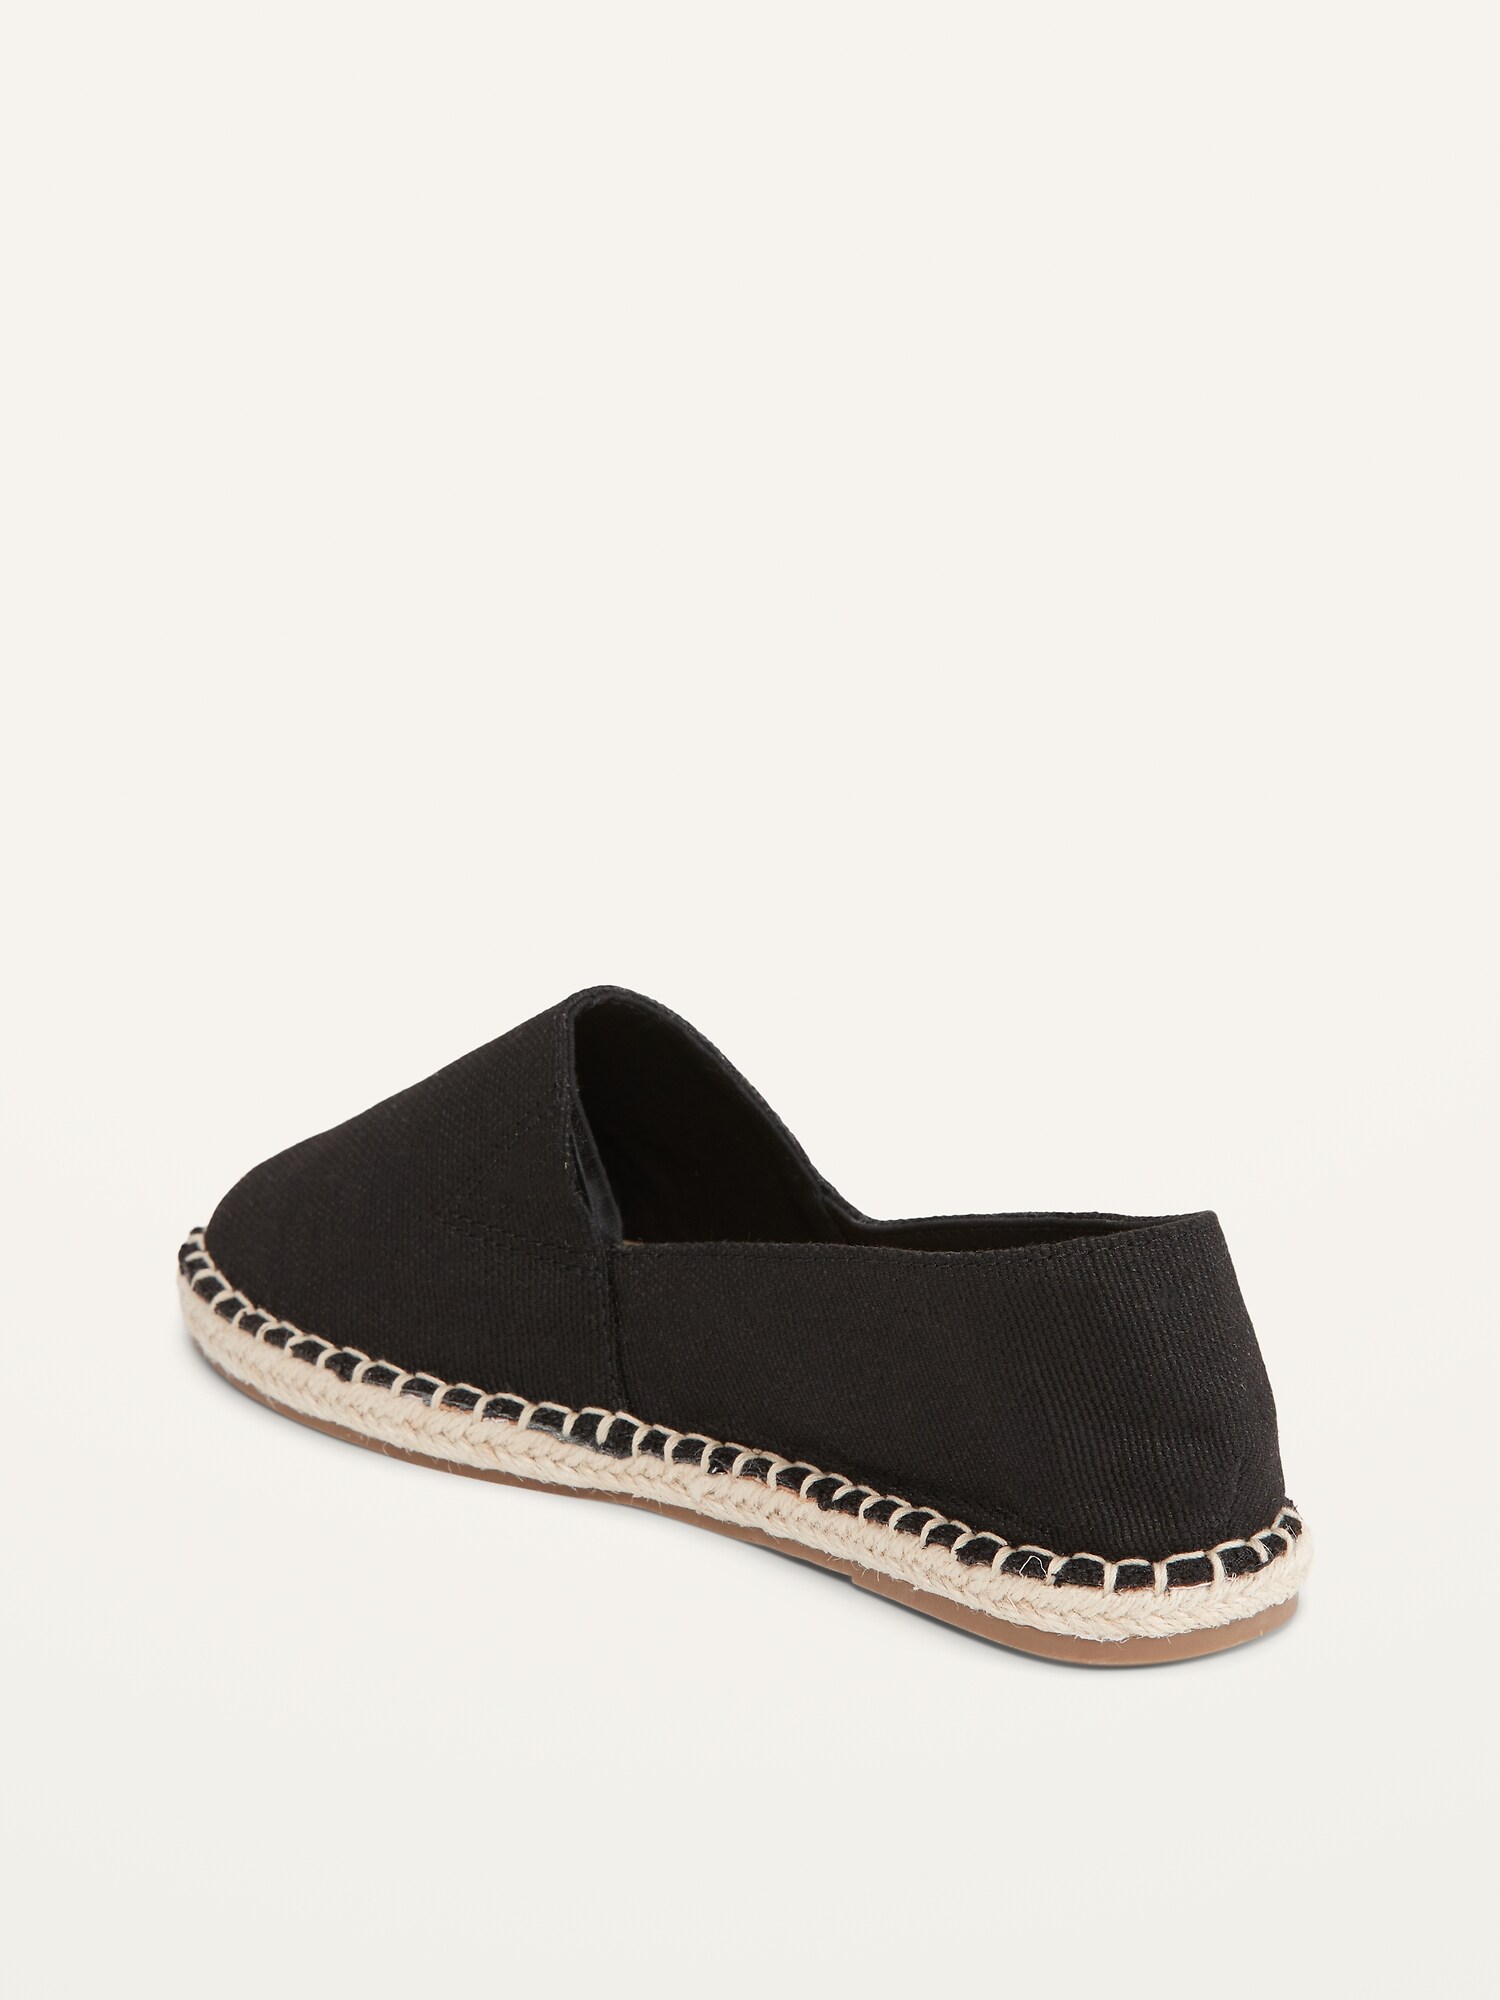 Canvas Espadrille Slip-Ons for Women | Old Navy